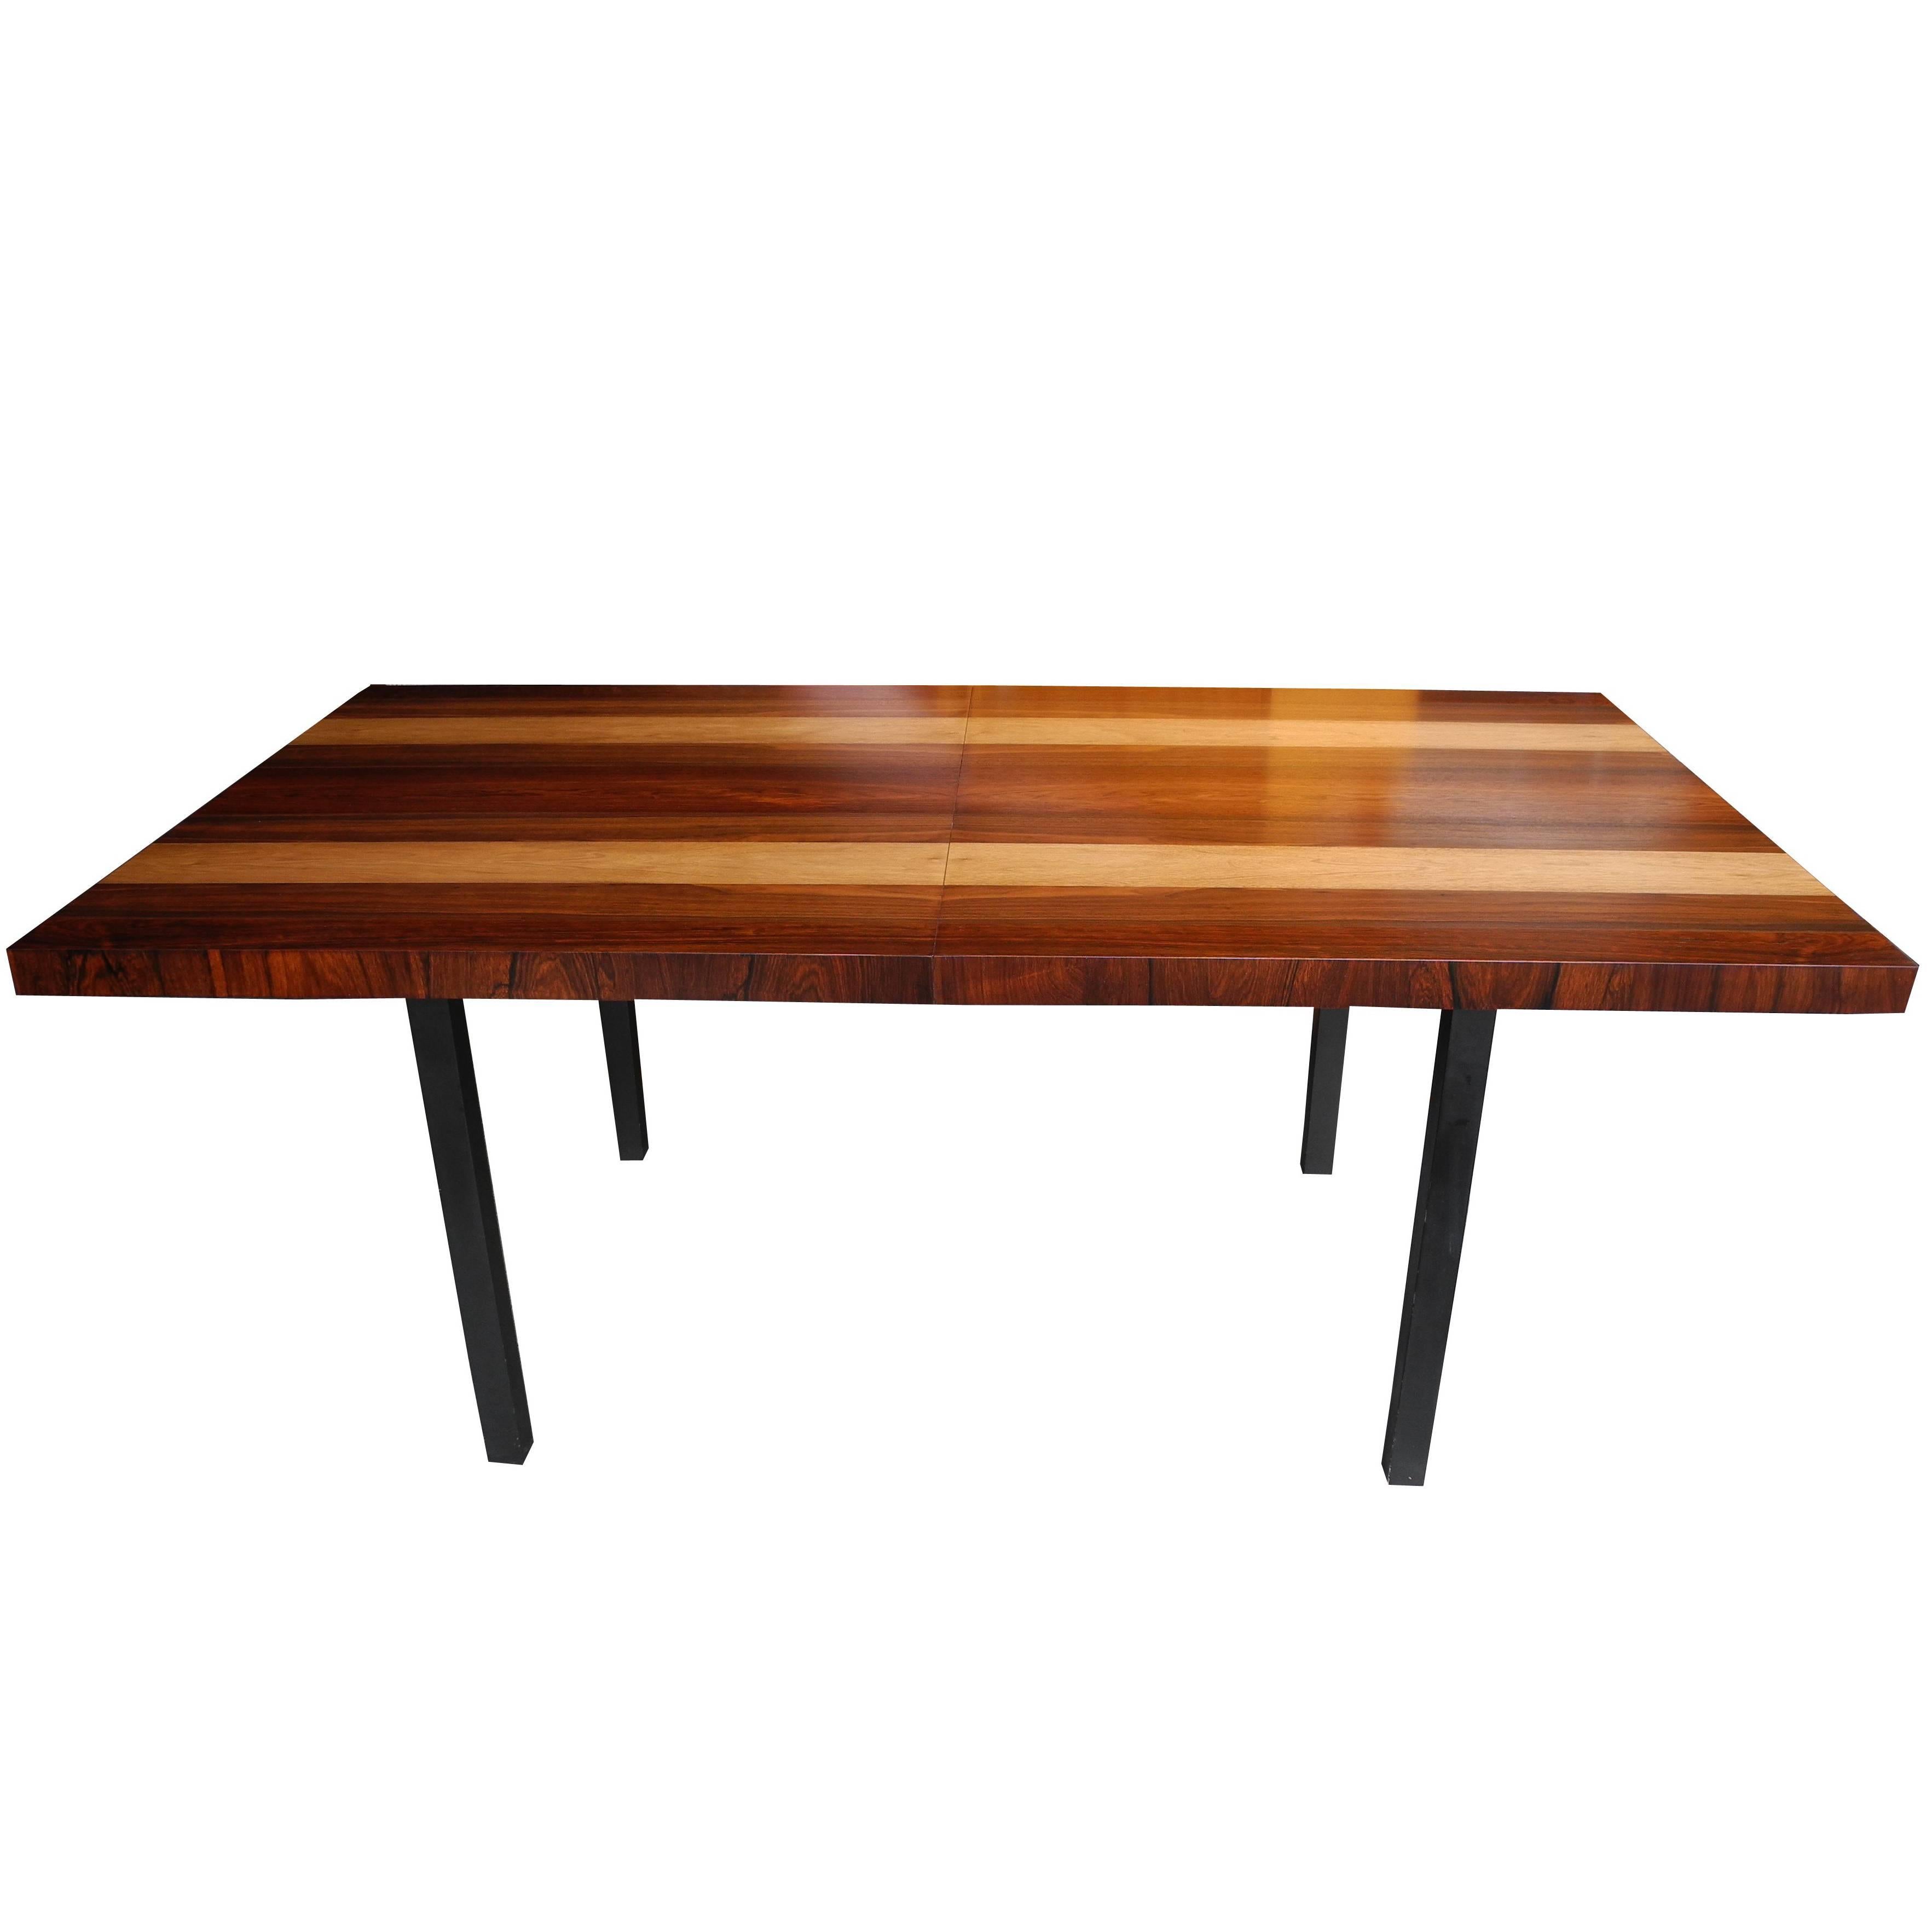 Striped Wood Dining Table by Milo Baughman for Directional with Two Leaves For Sale